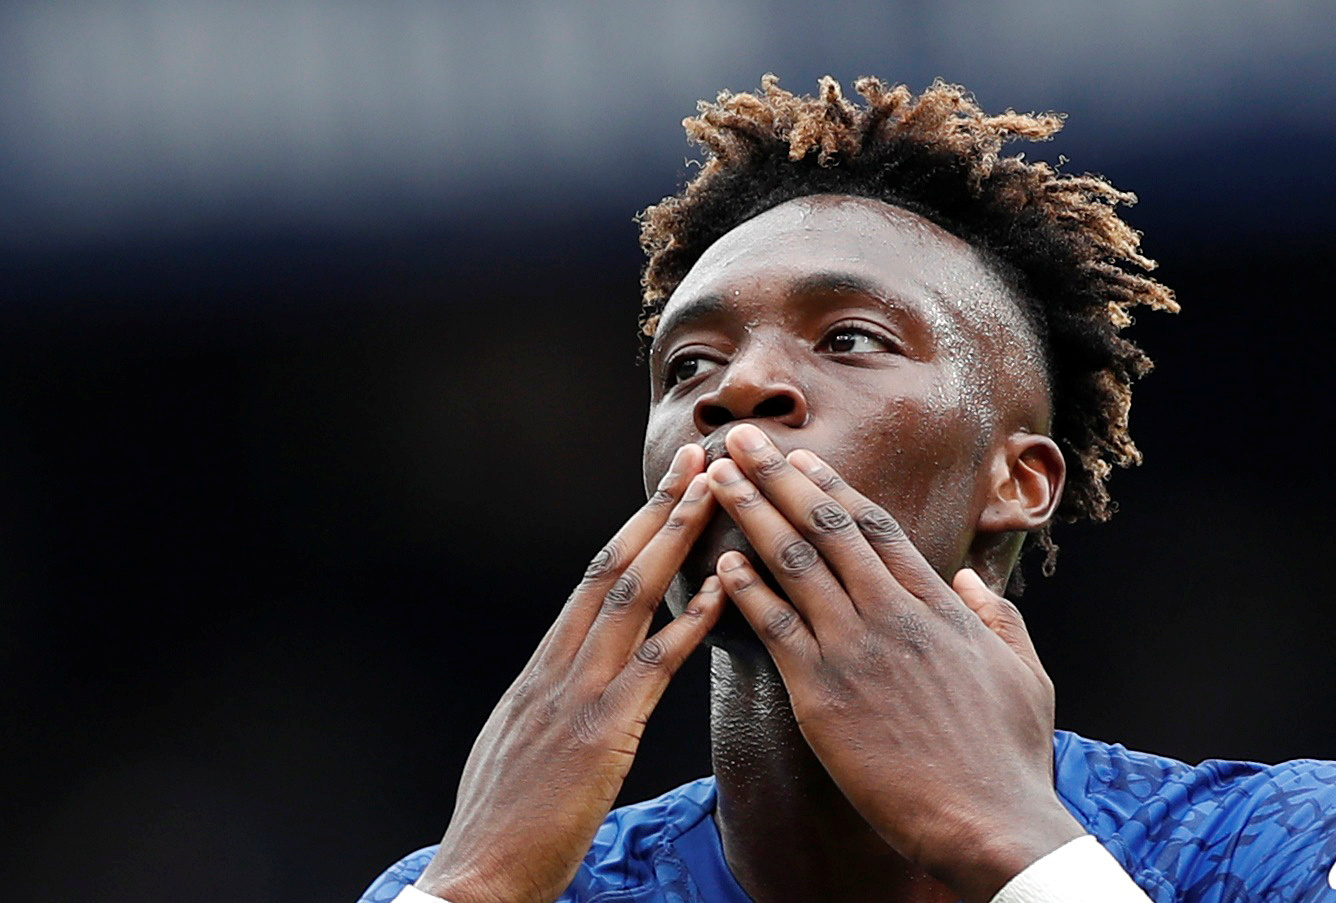 Chelsea striker reveals how the foul racism affected his mother